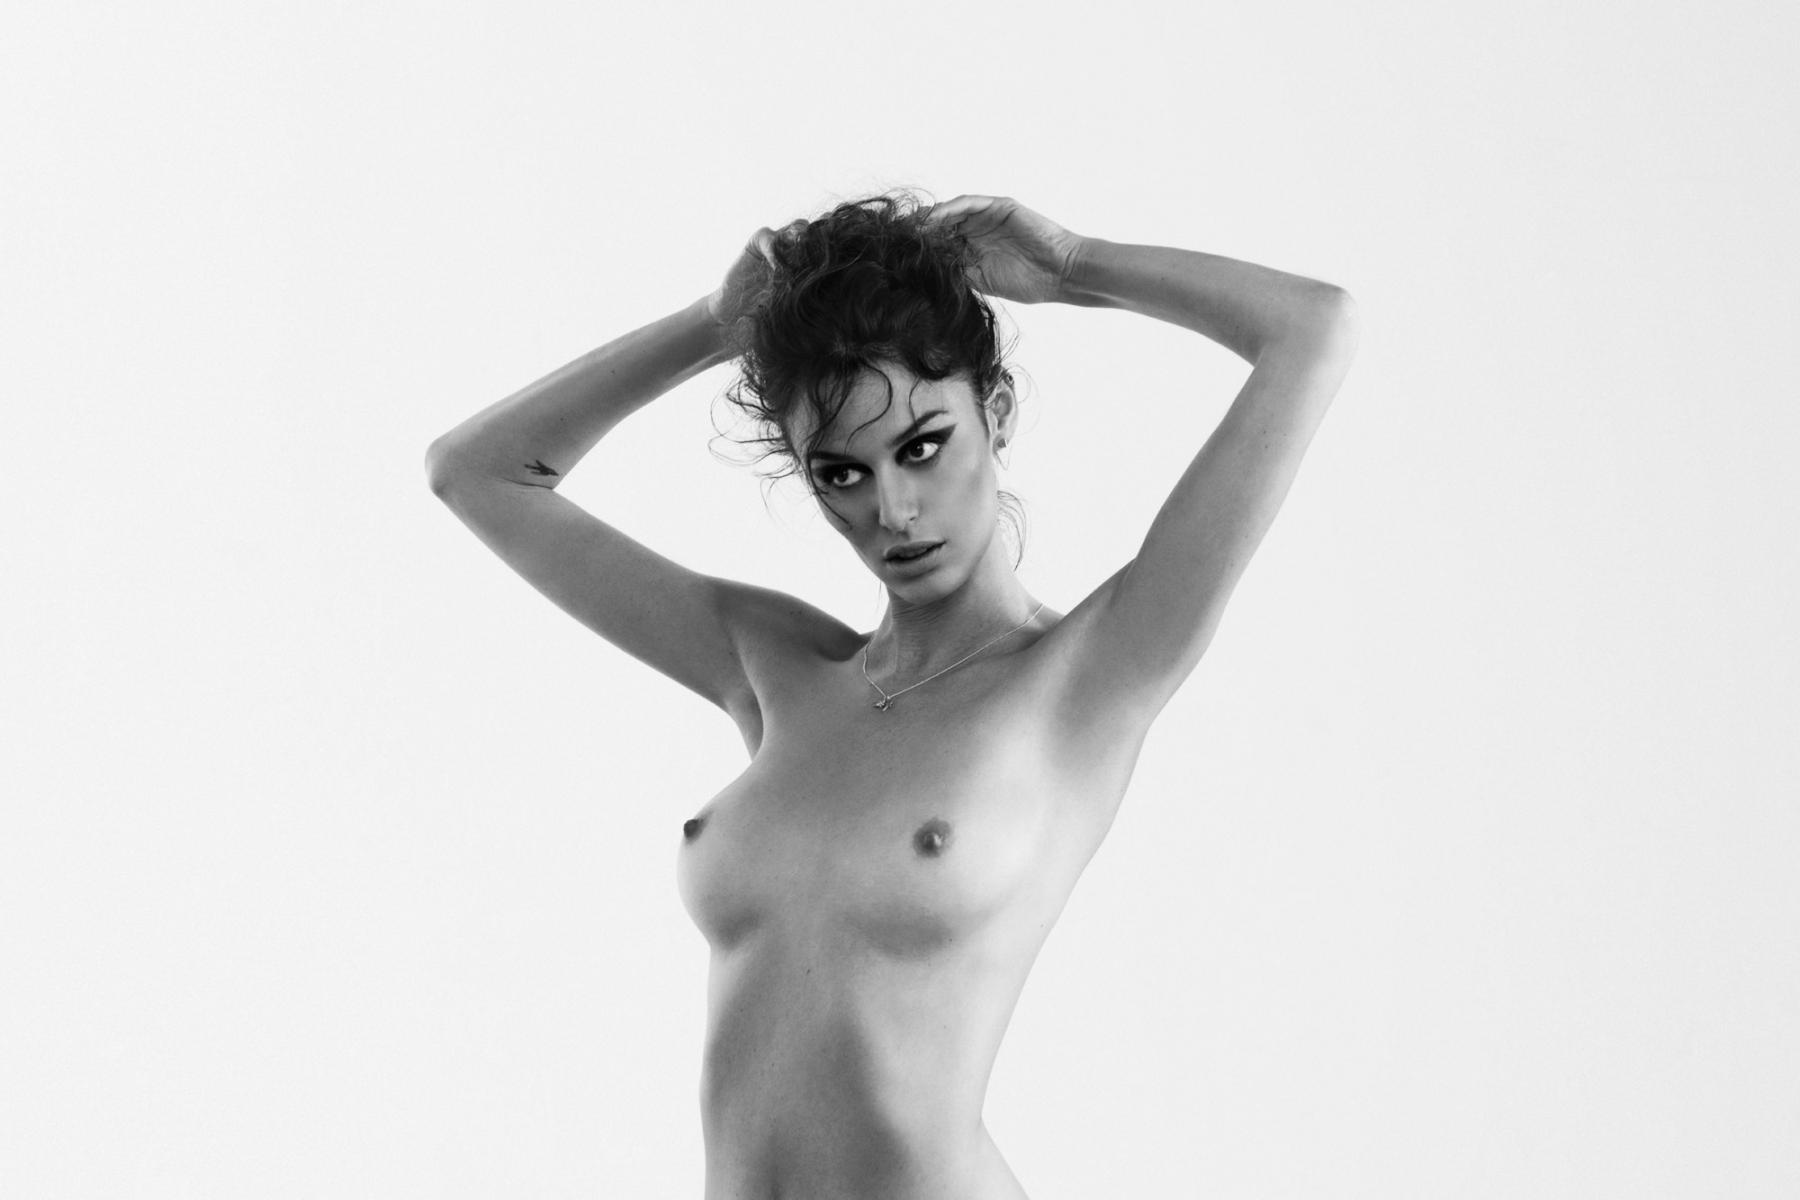 brian errico recommends Nicole Trunfio Naked